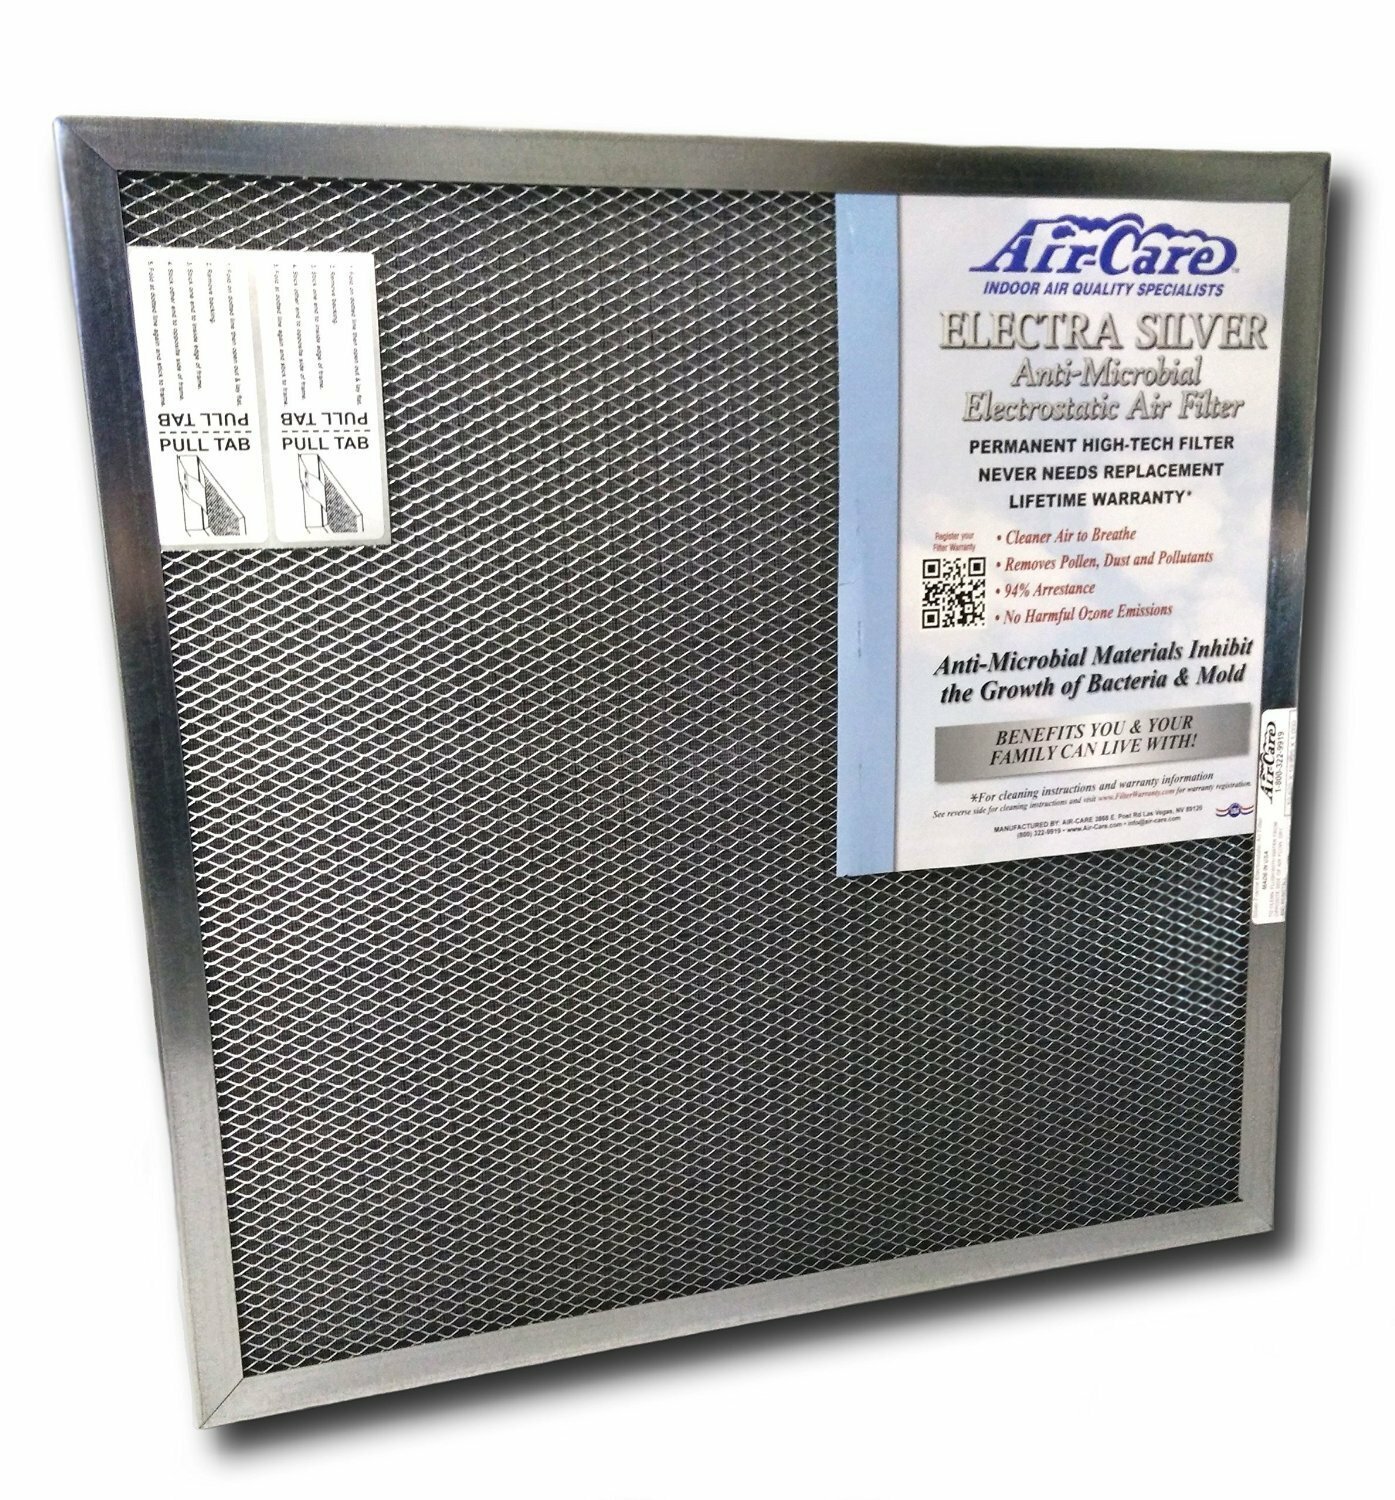 Aluminum Electrostatic Air Filter Replacement Washable Air Purifier A/C Filter for Central HVAC by LifeSupplyUSA 20x30x1